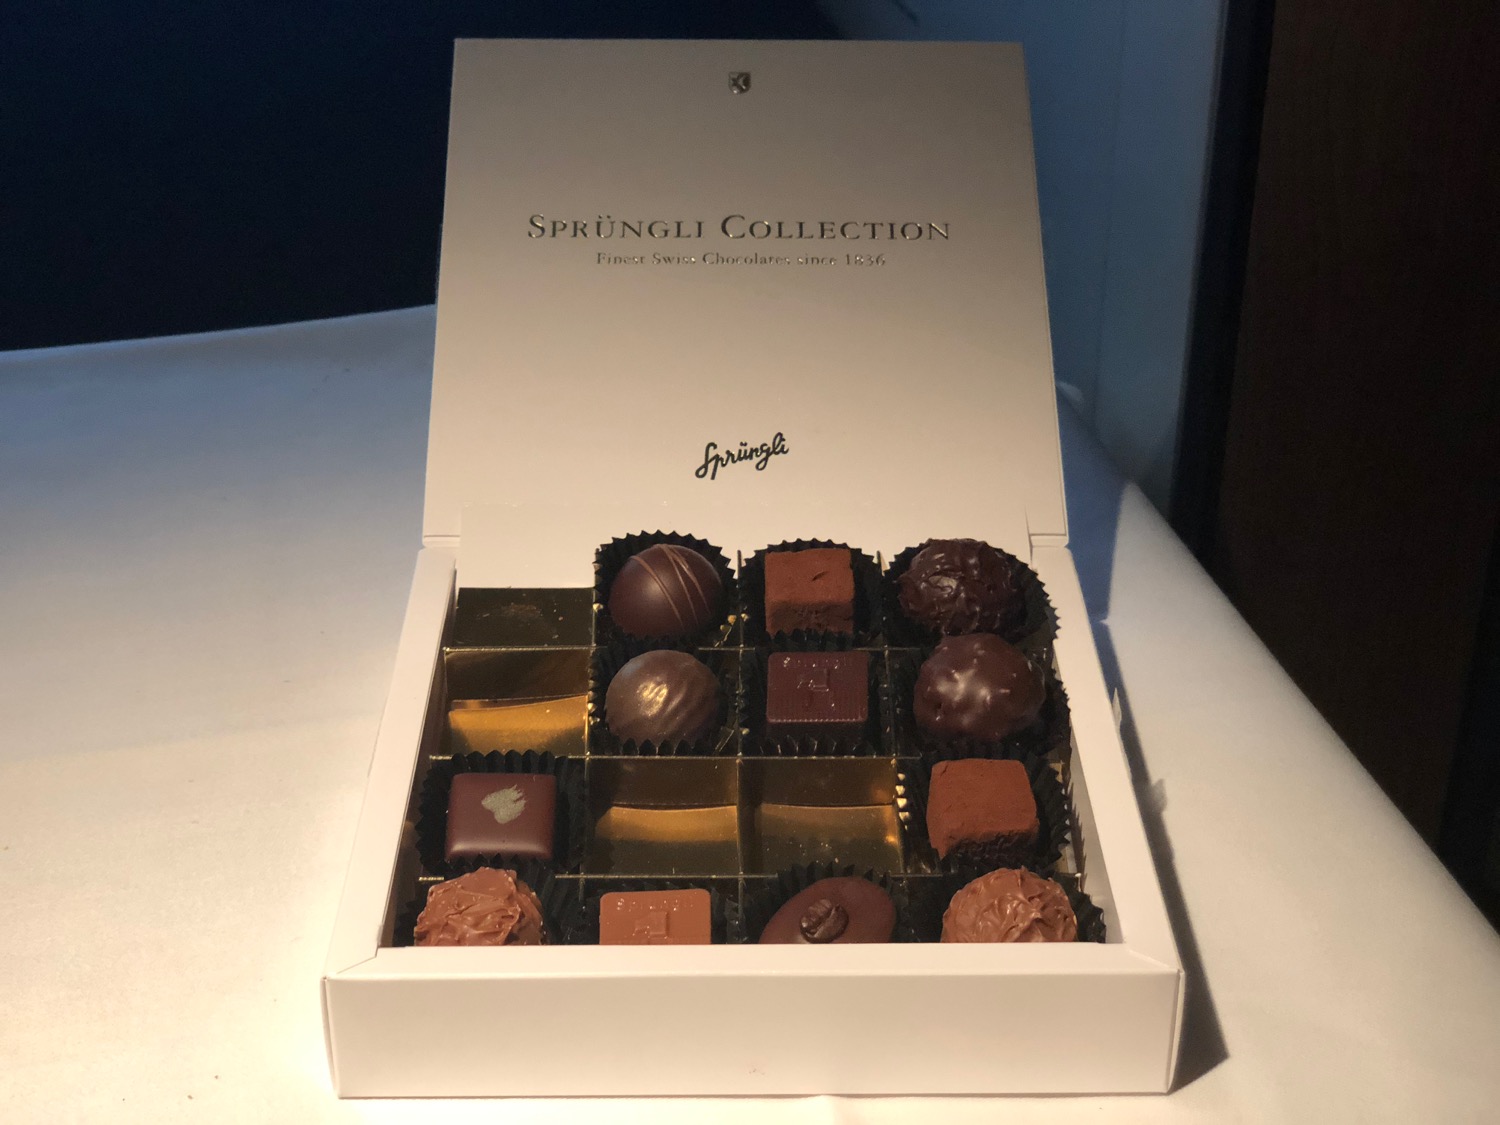 a box of chocolates on a table